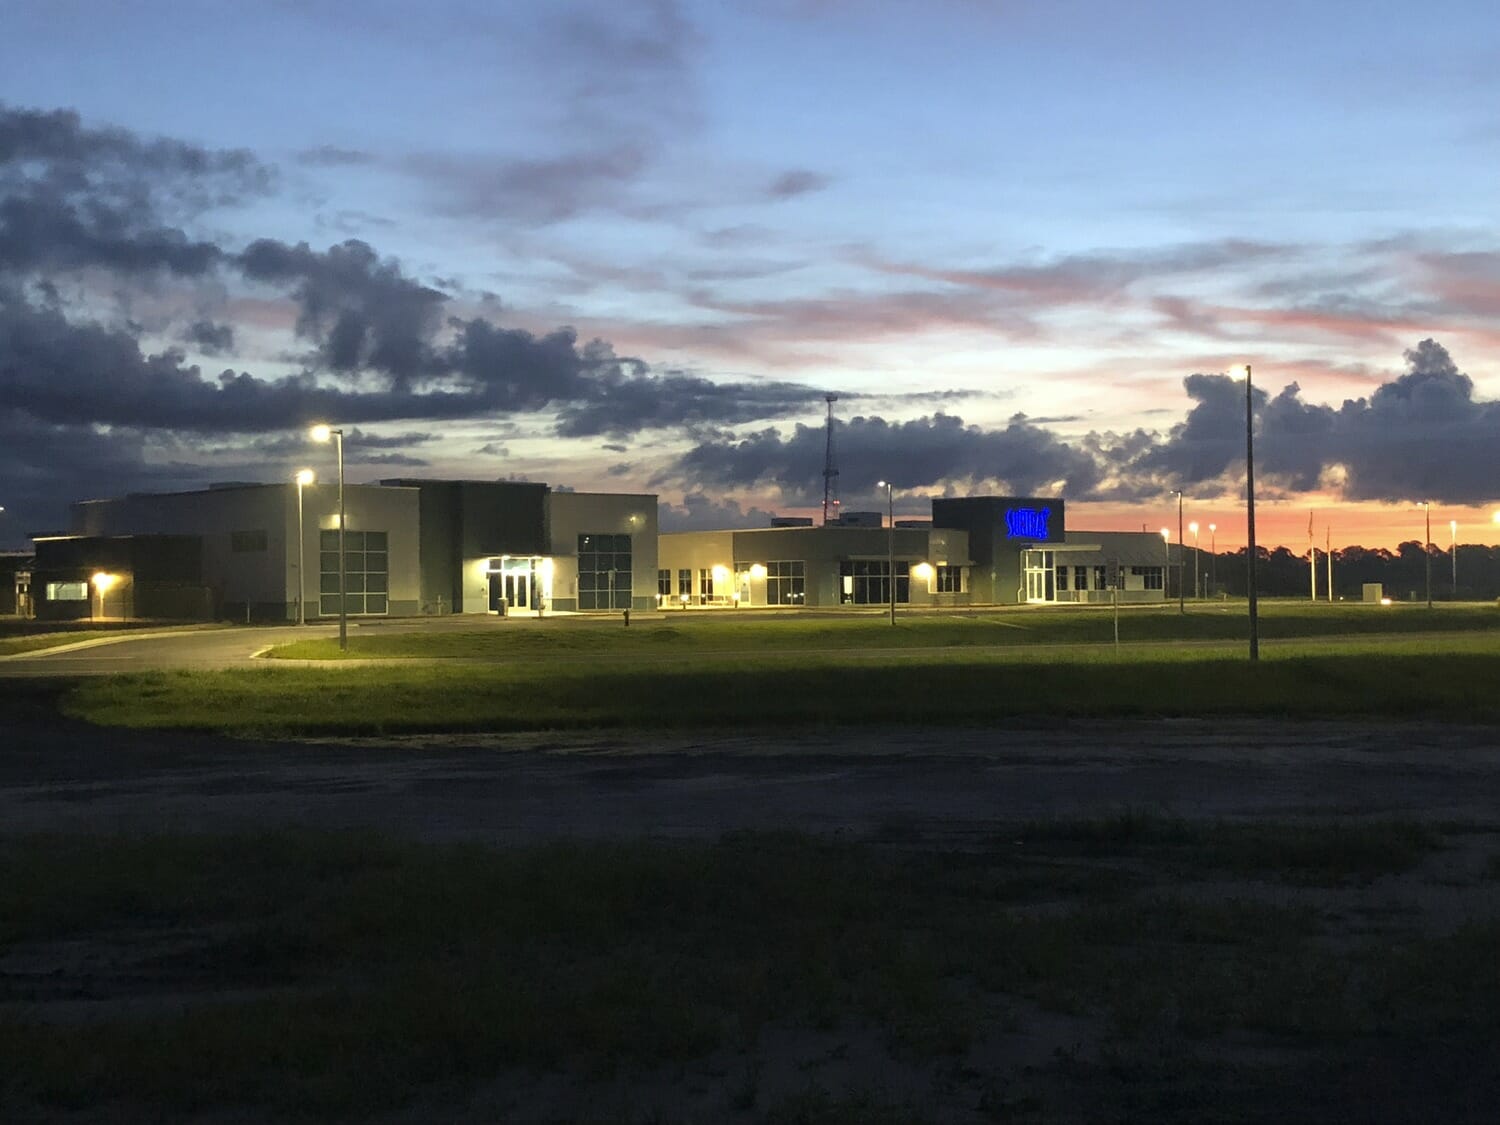 An image of a building at dusk.